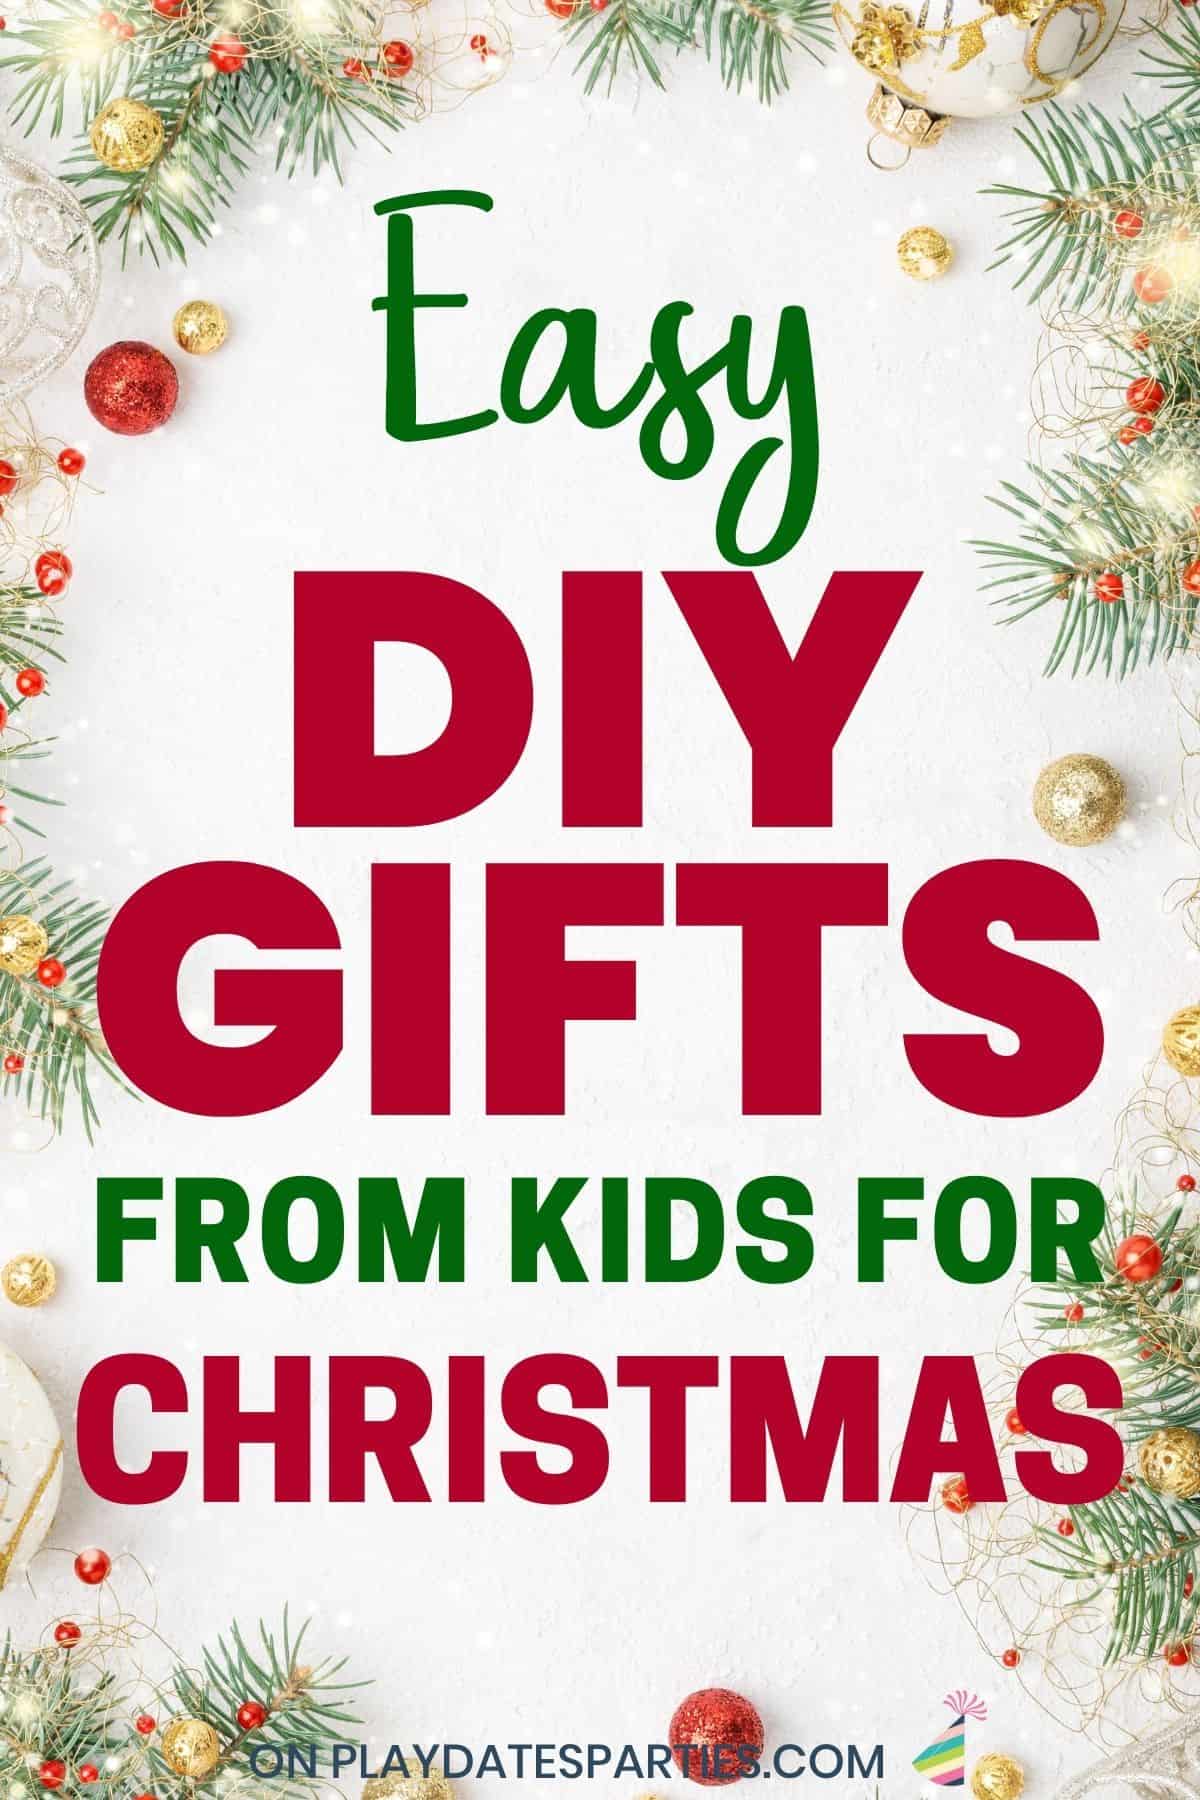 DIY Christmas Gift Ideas - Simple and Affordable! - YouTube